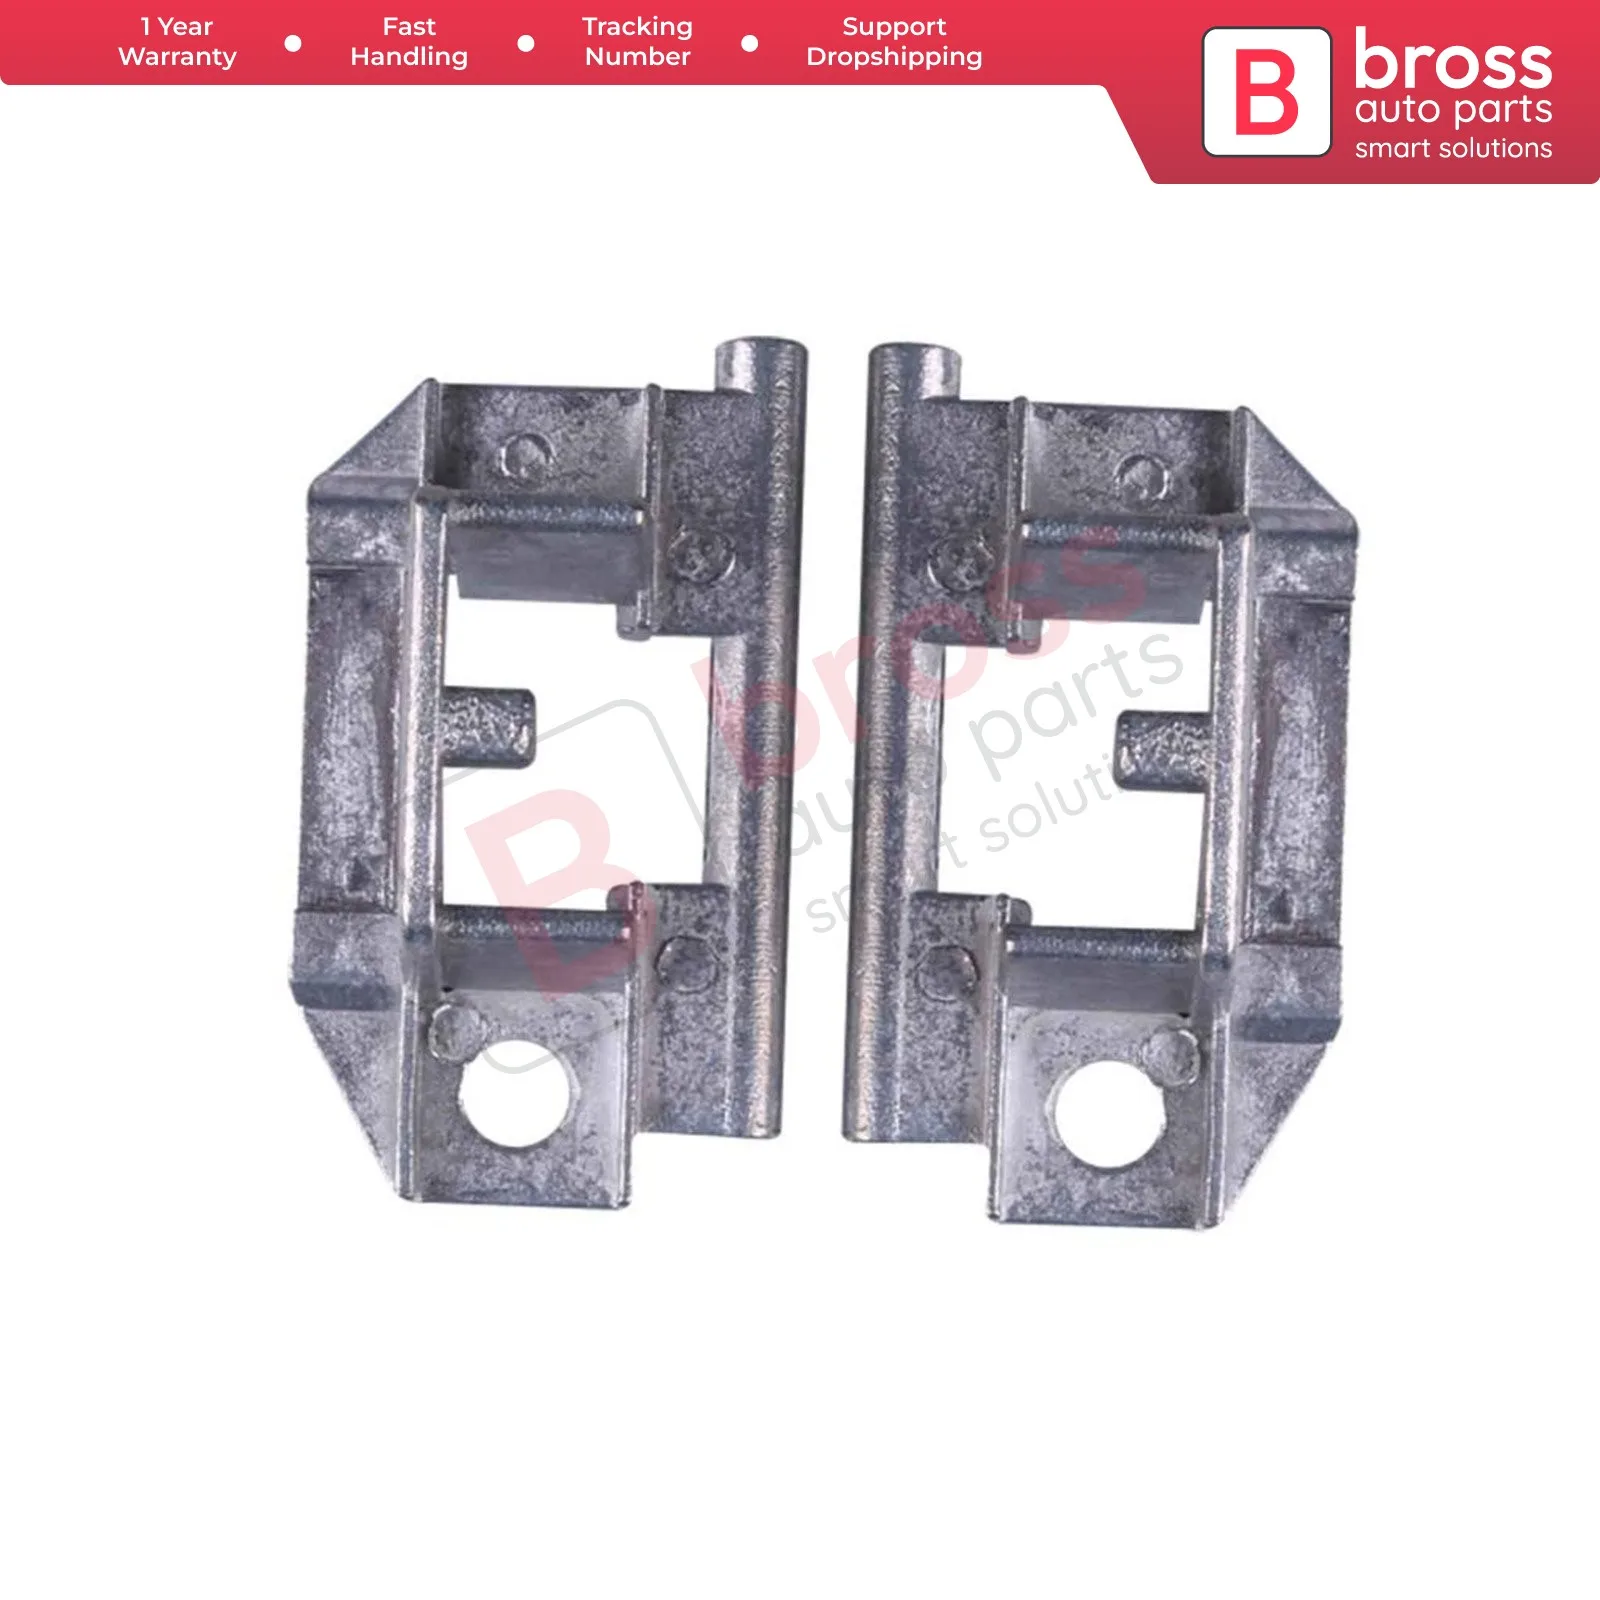 

Bross Auto Parts BSR27 Sunroof Slider Left And Right Brackets for Peugeot 206 Fast Shipment Free Shipment Ship From Turkey